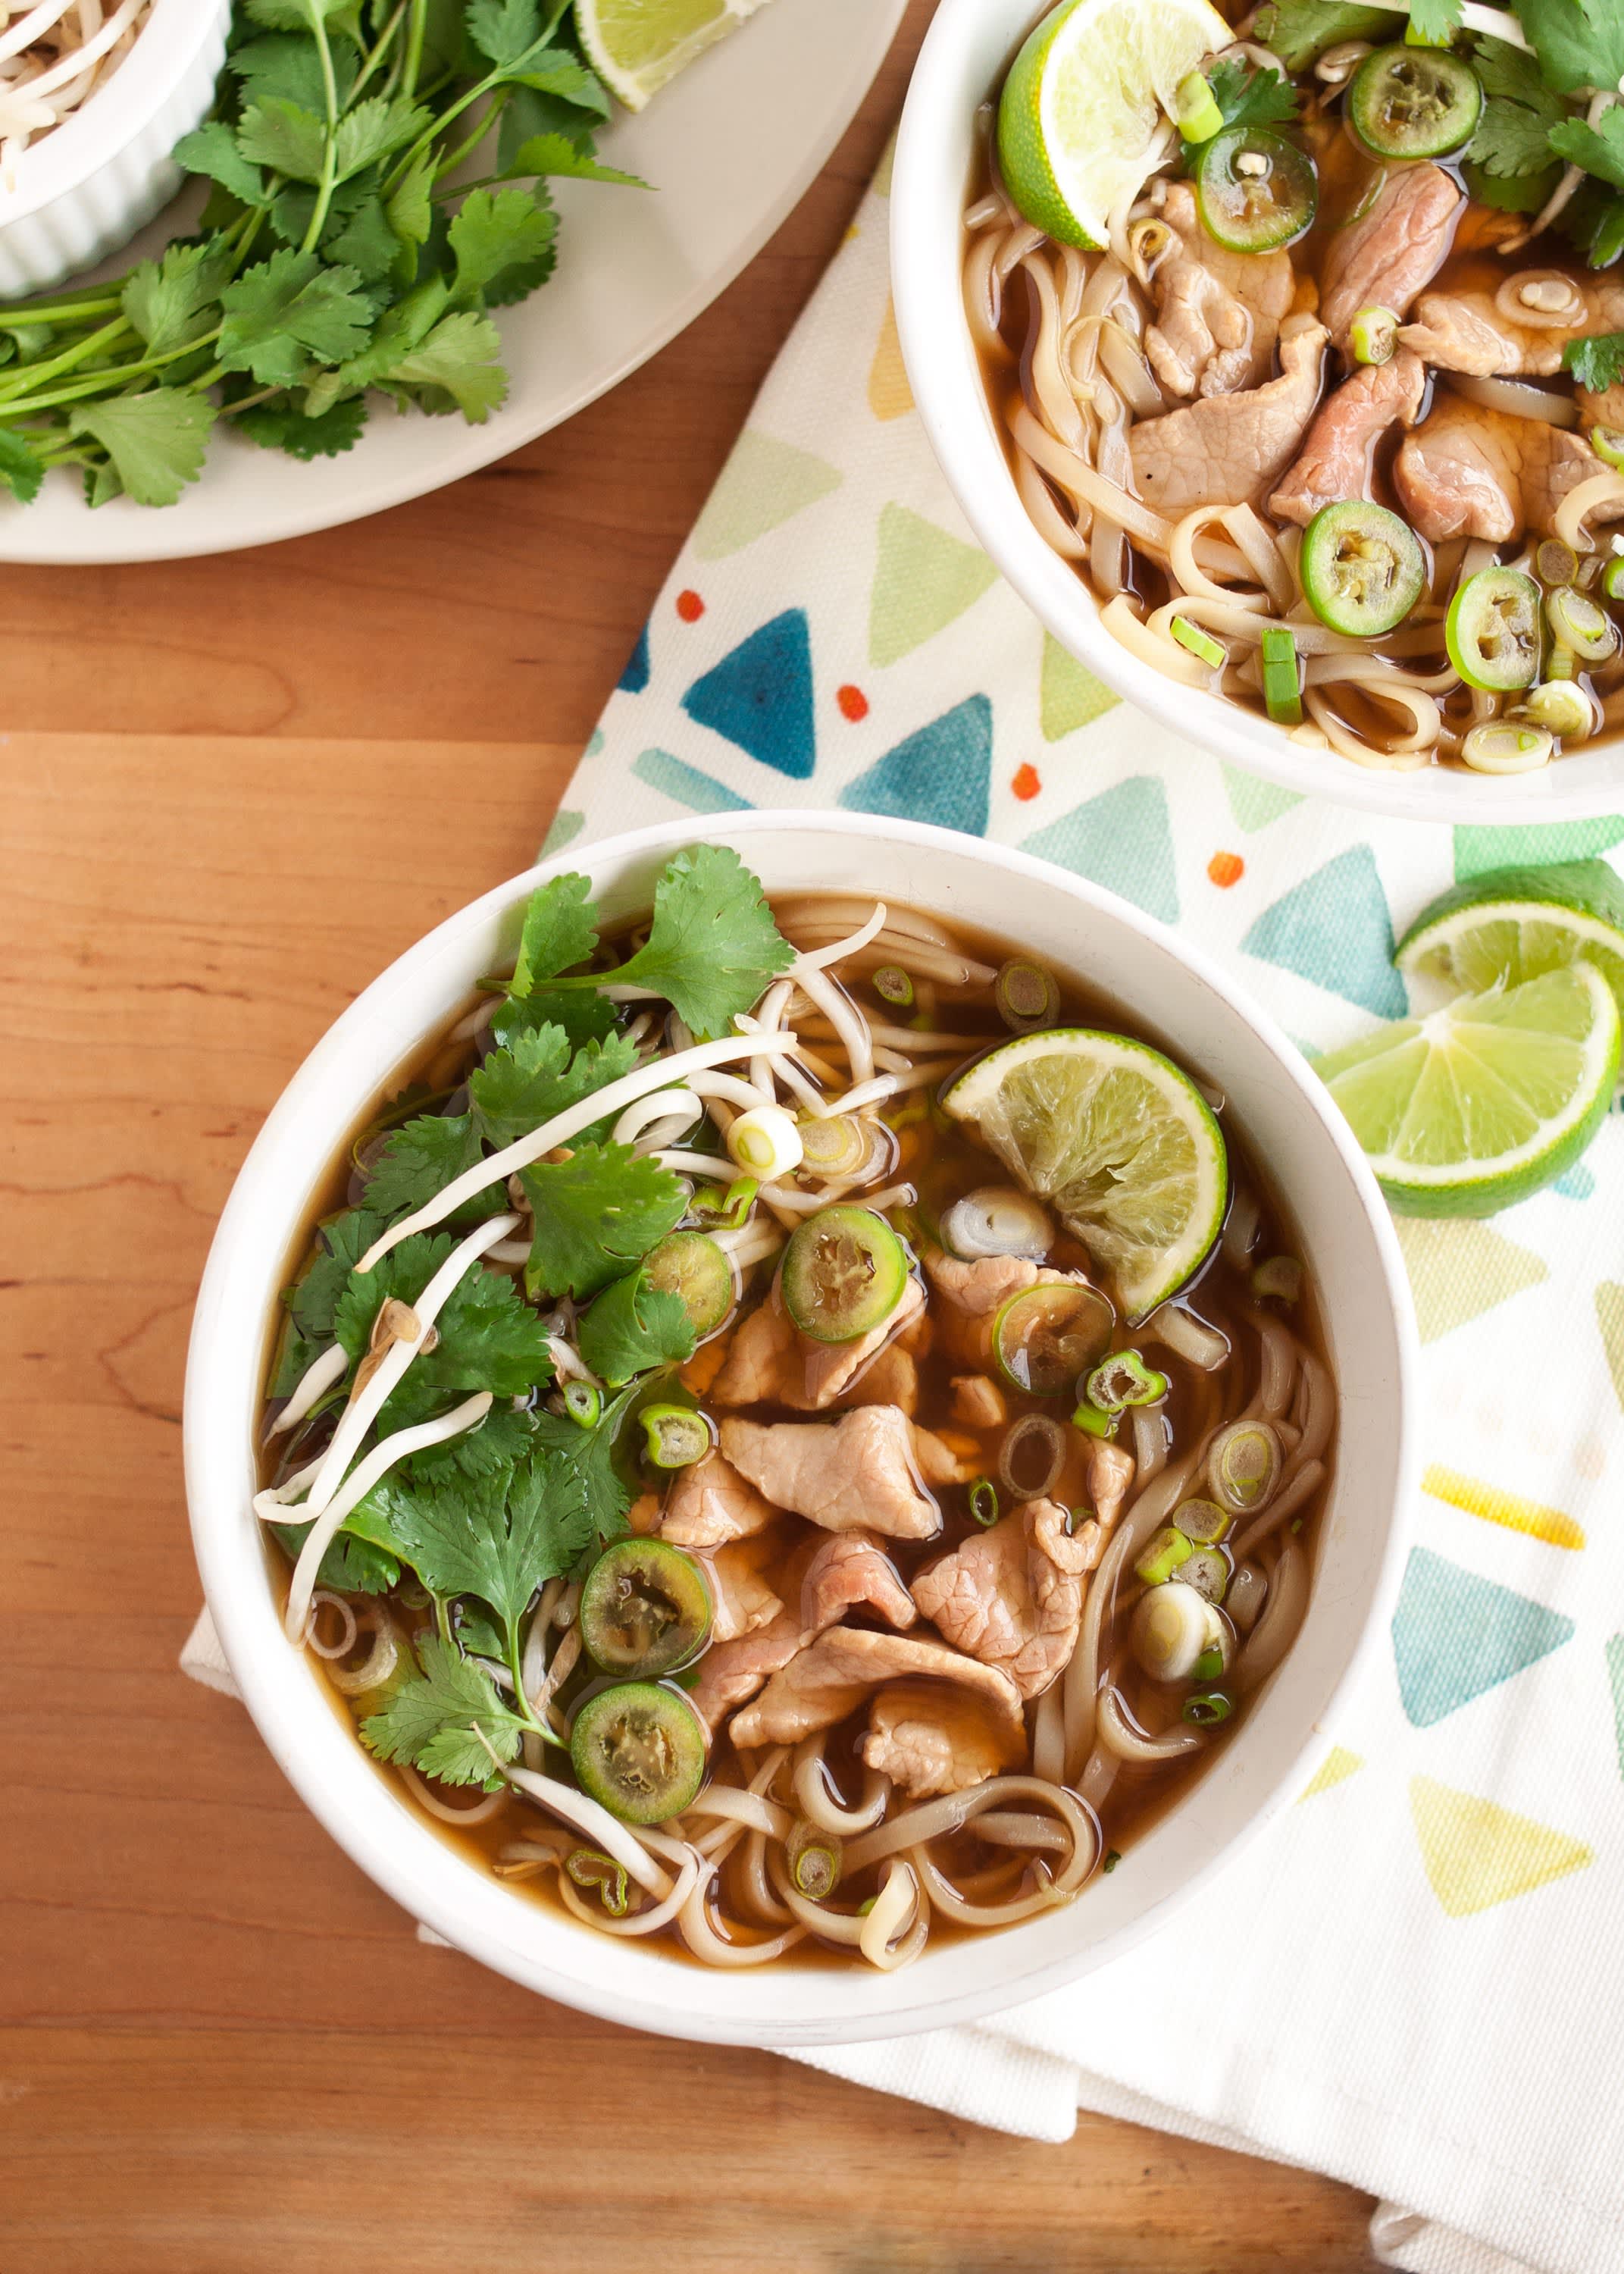 Pho Recipe - How To Make Vietnamese Beef Noodle Pho | Kitchn